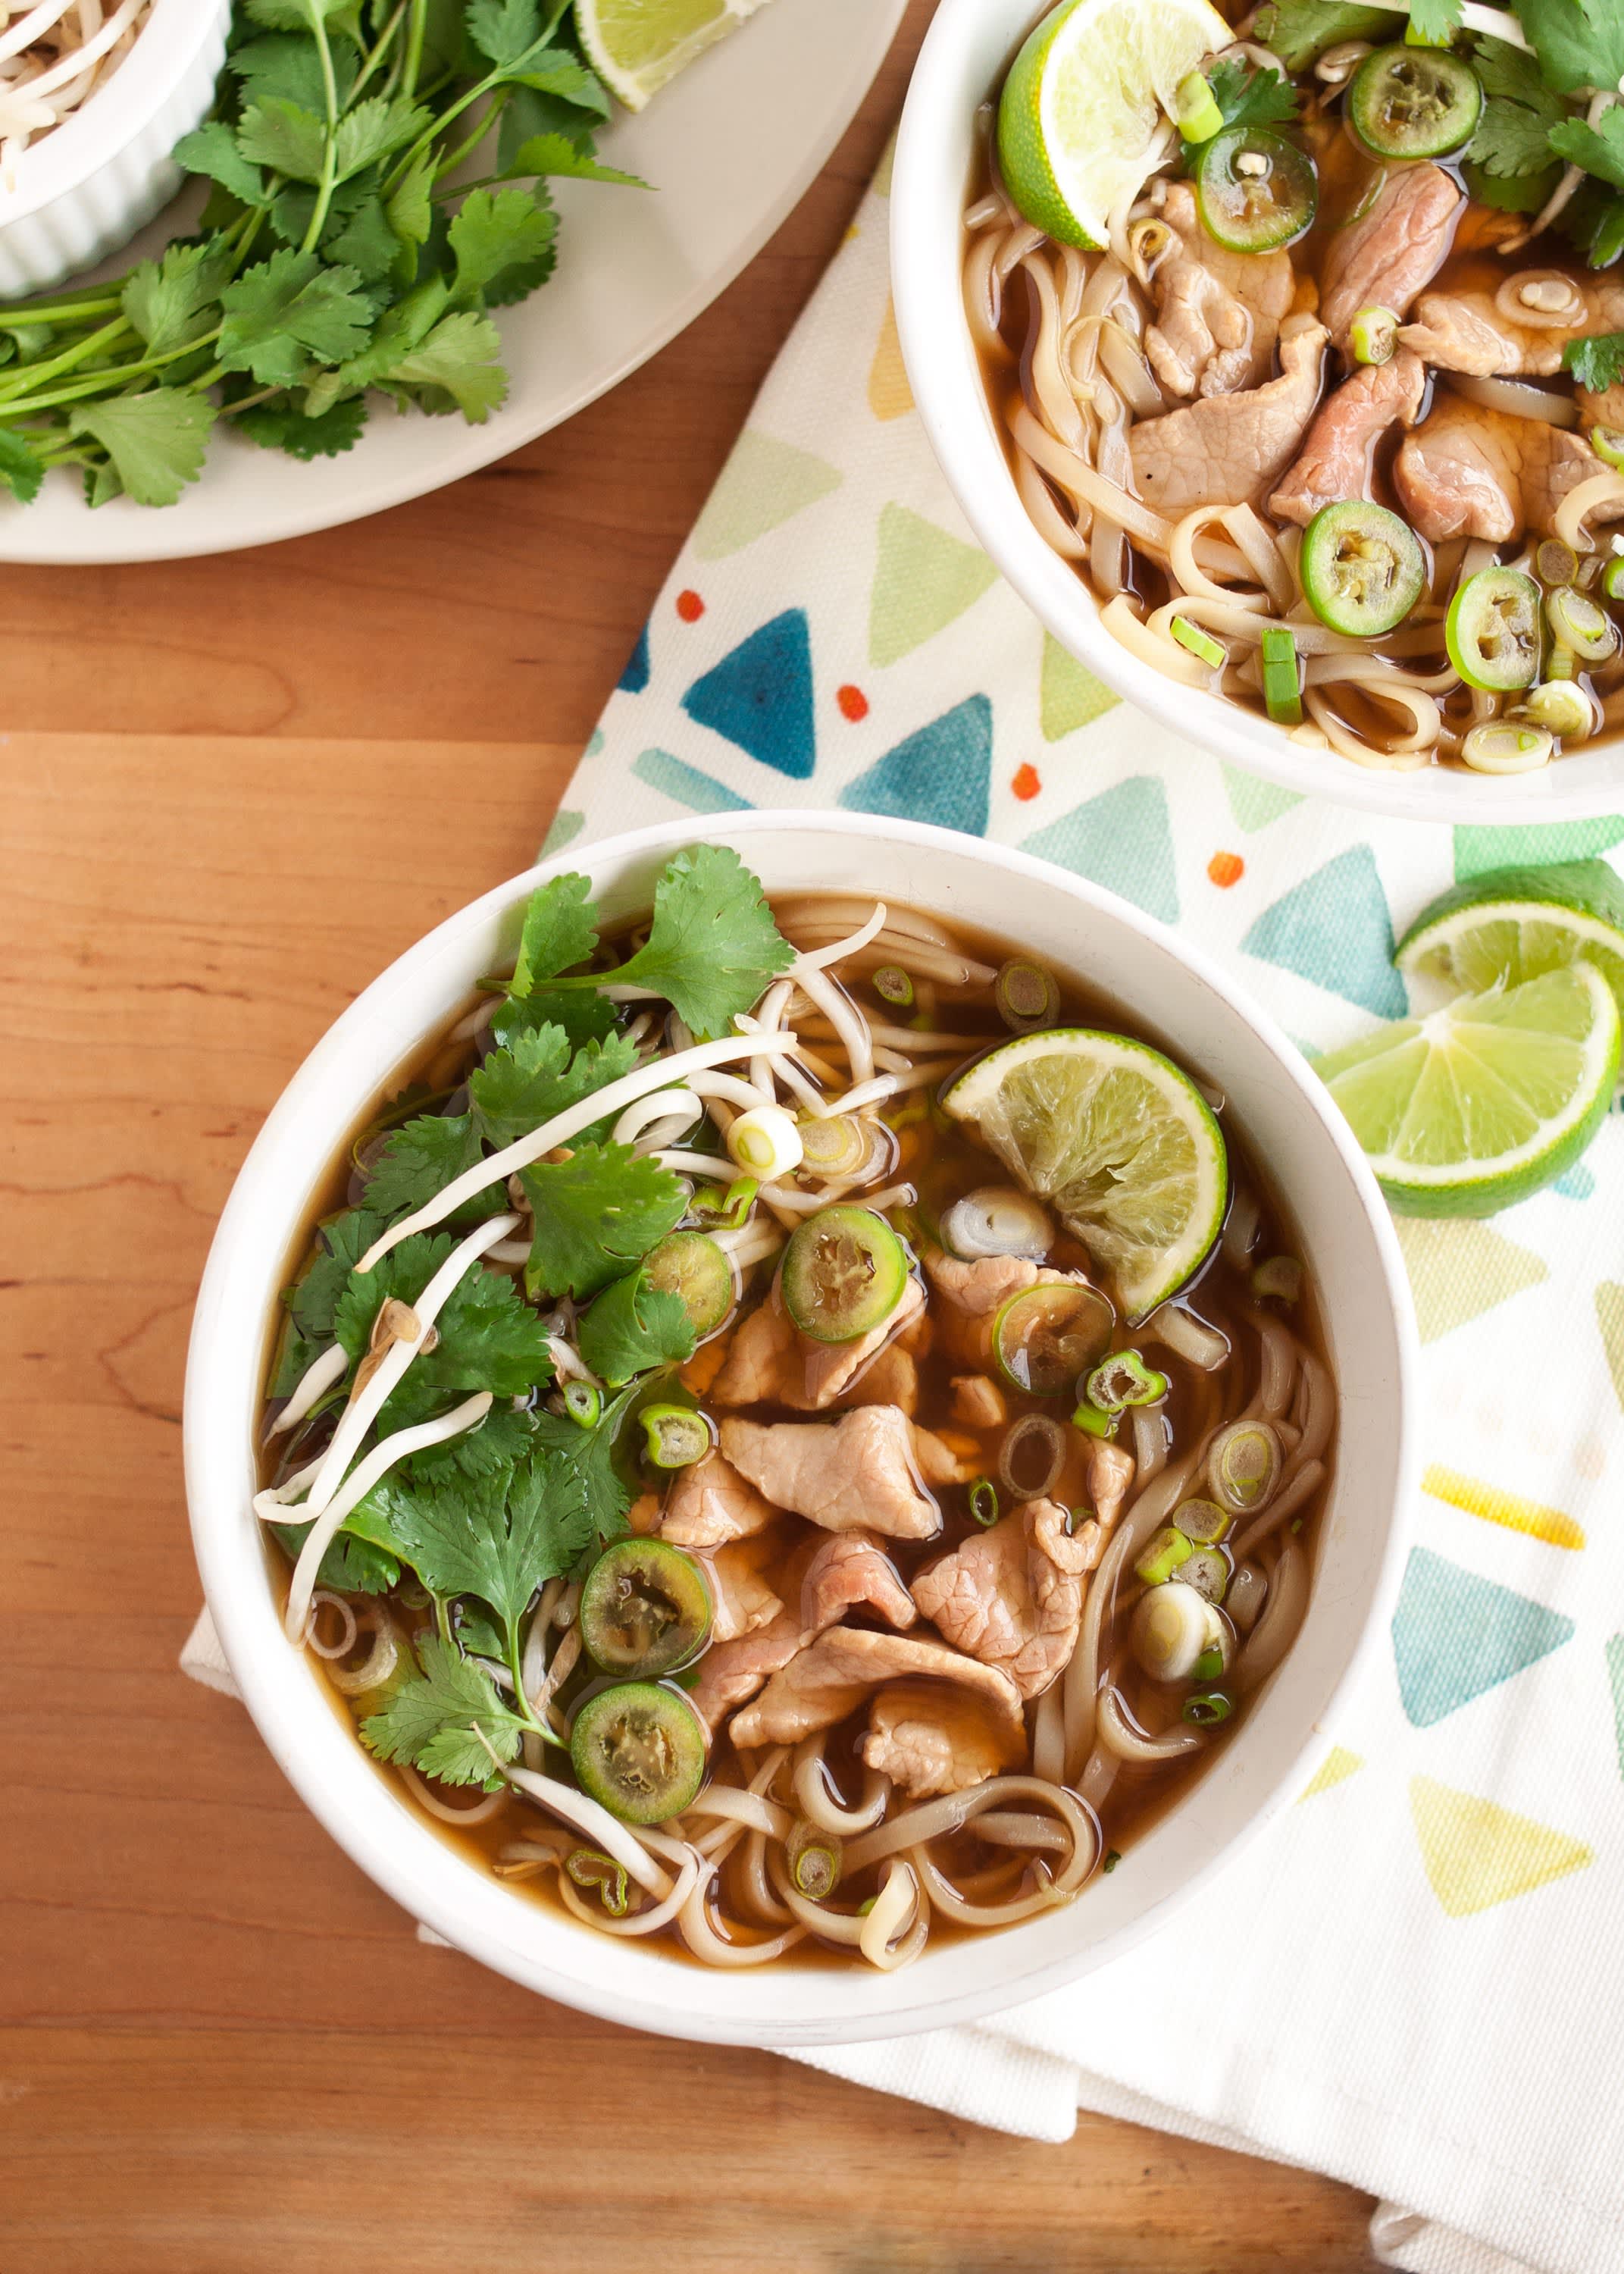 Pho Recipe - How To Make Vietnamese Beef Noodle Pho | Kitchn